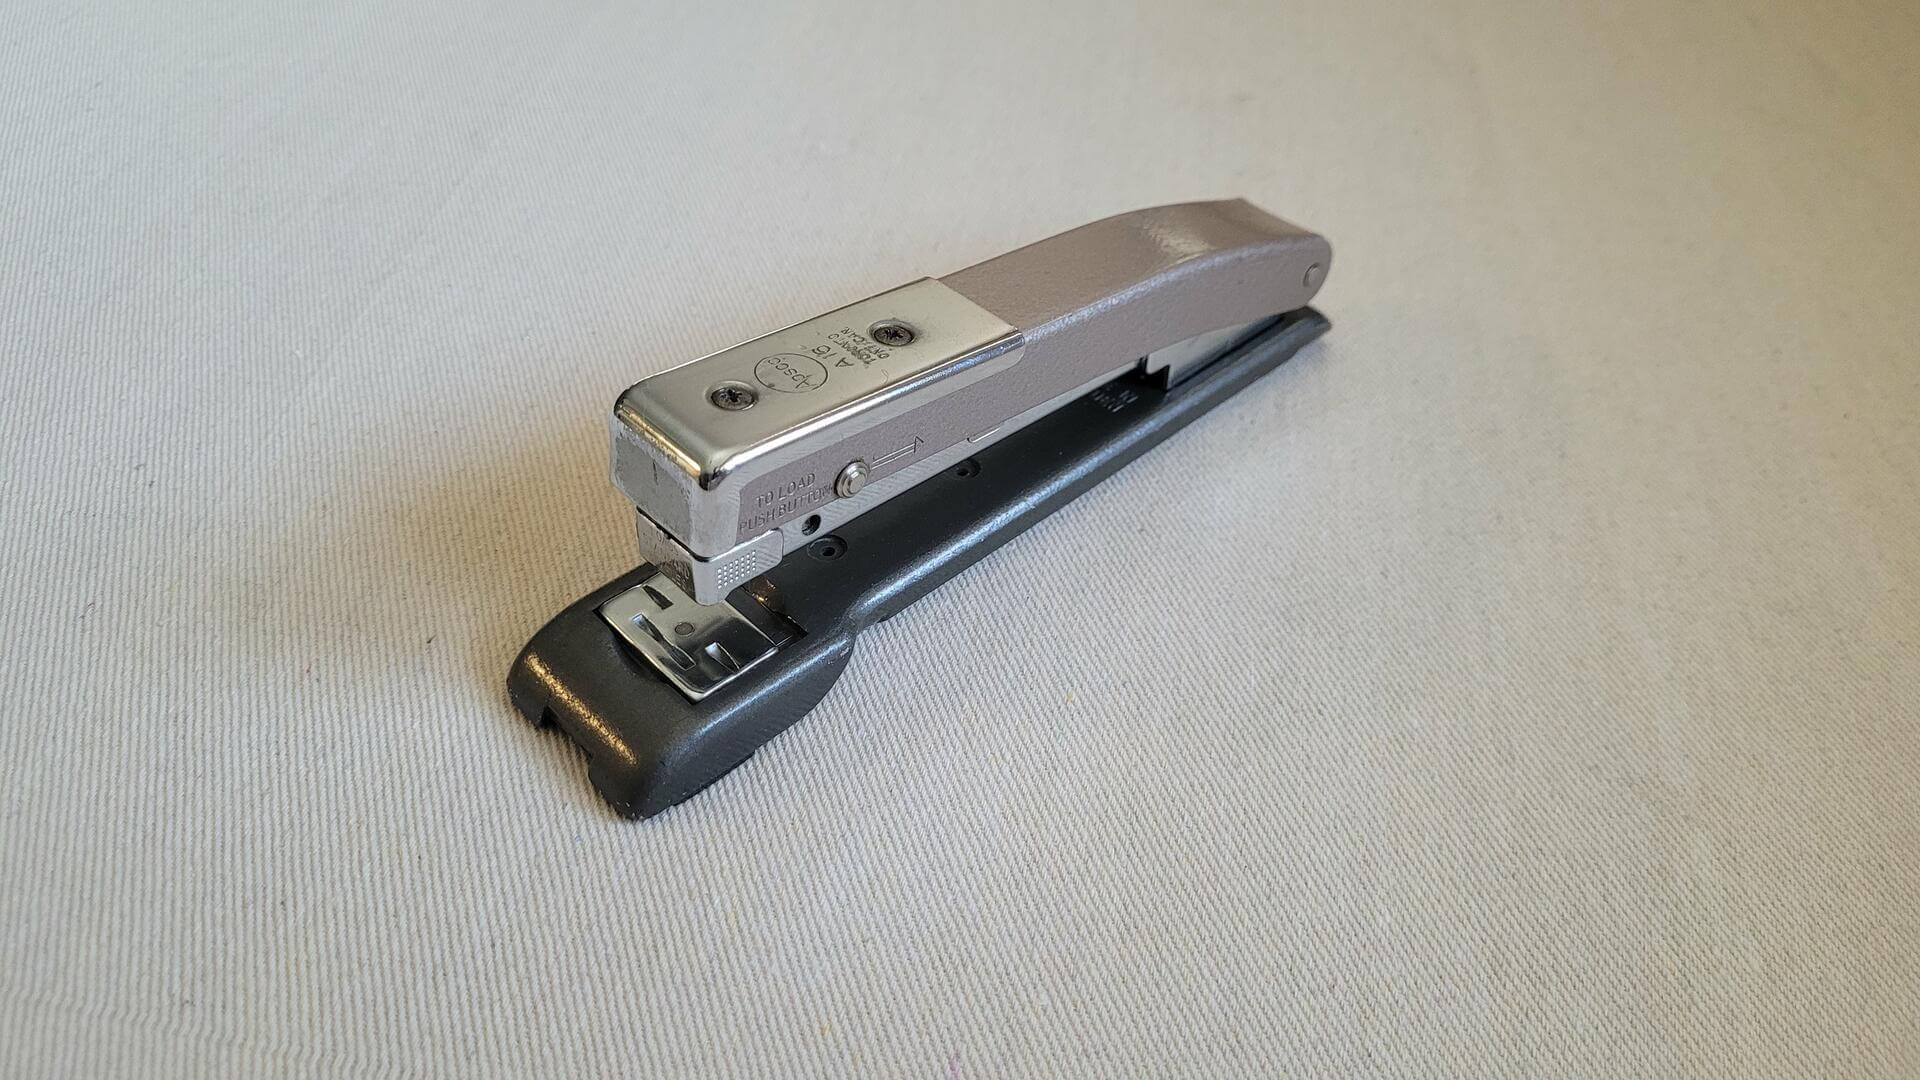 Apsco 16 paper stapler Isaberg AB Hestra mid century design. Vintage made in Sweden collectible mid century stationary and office equipment tool